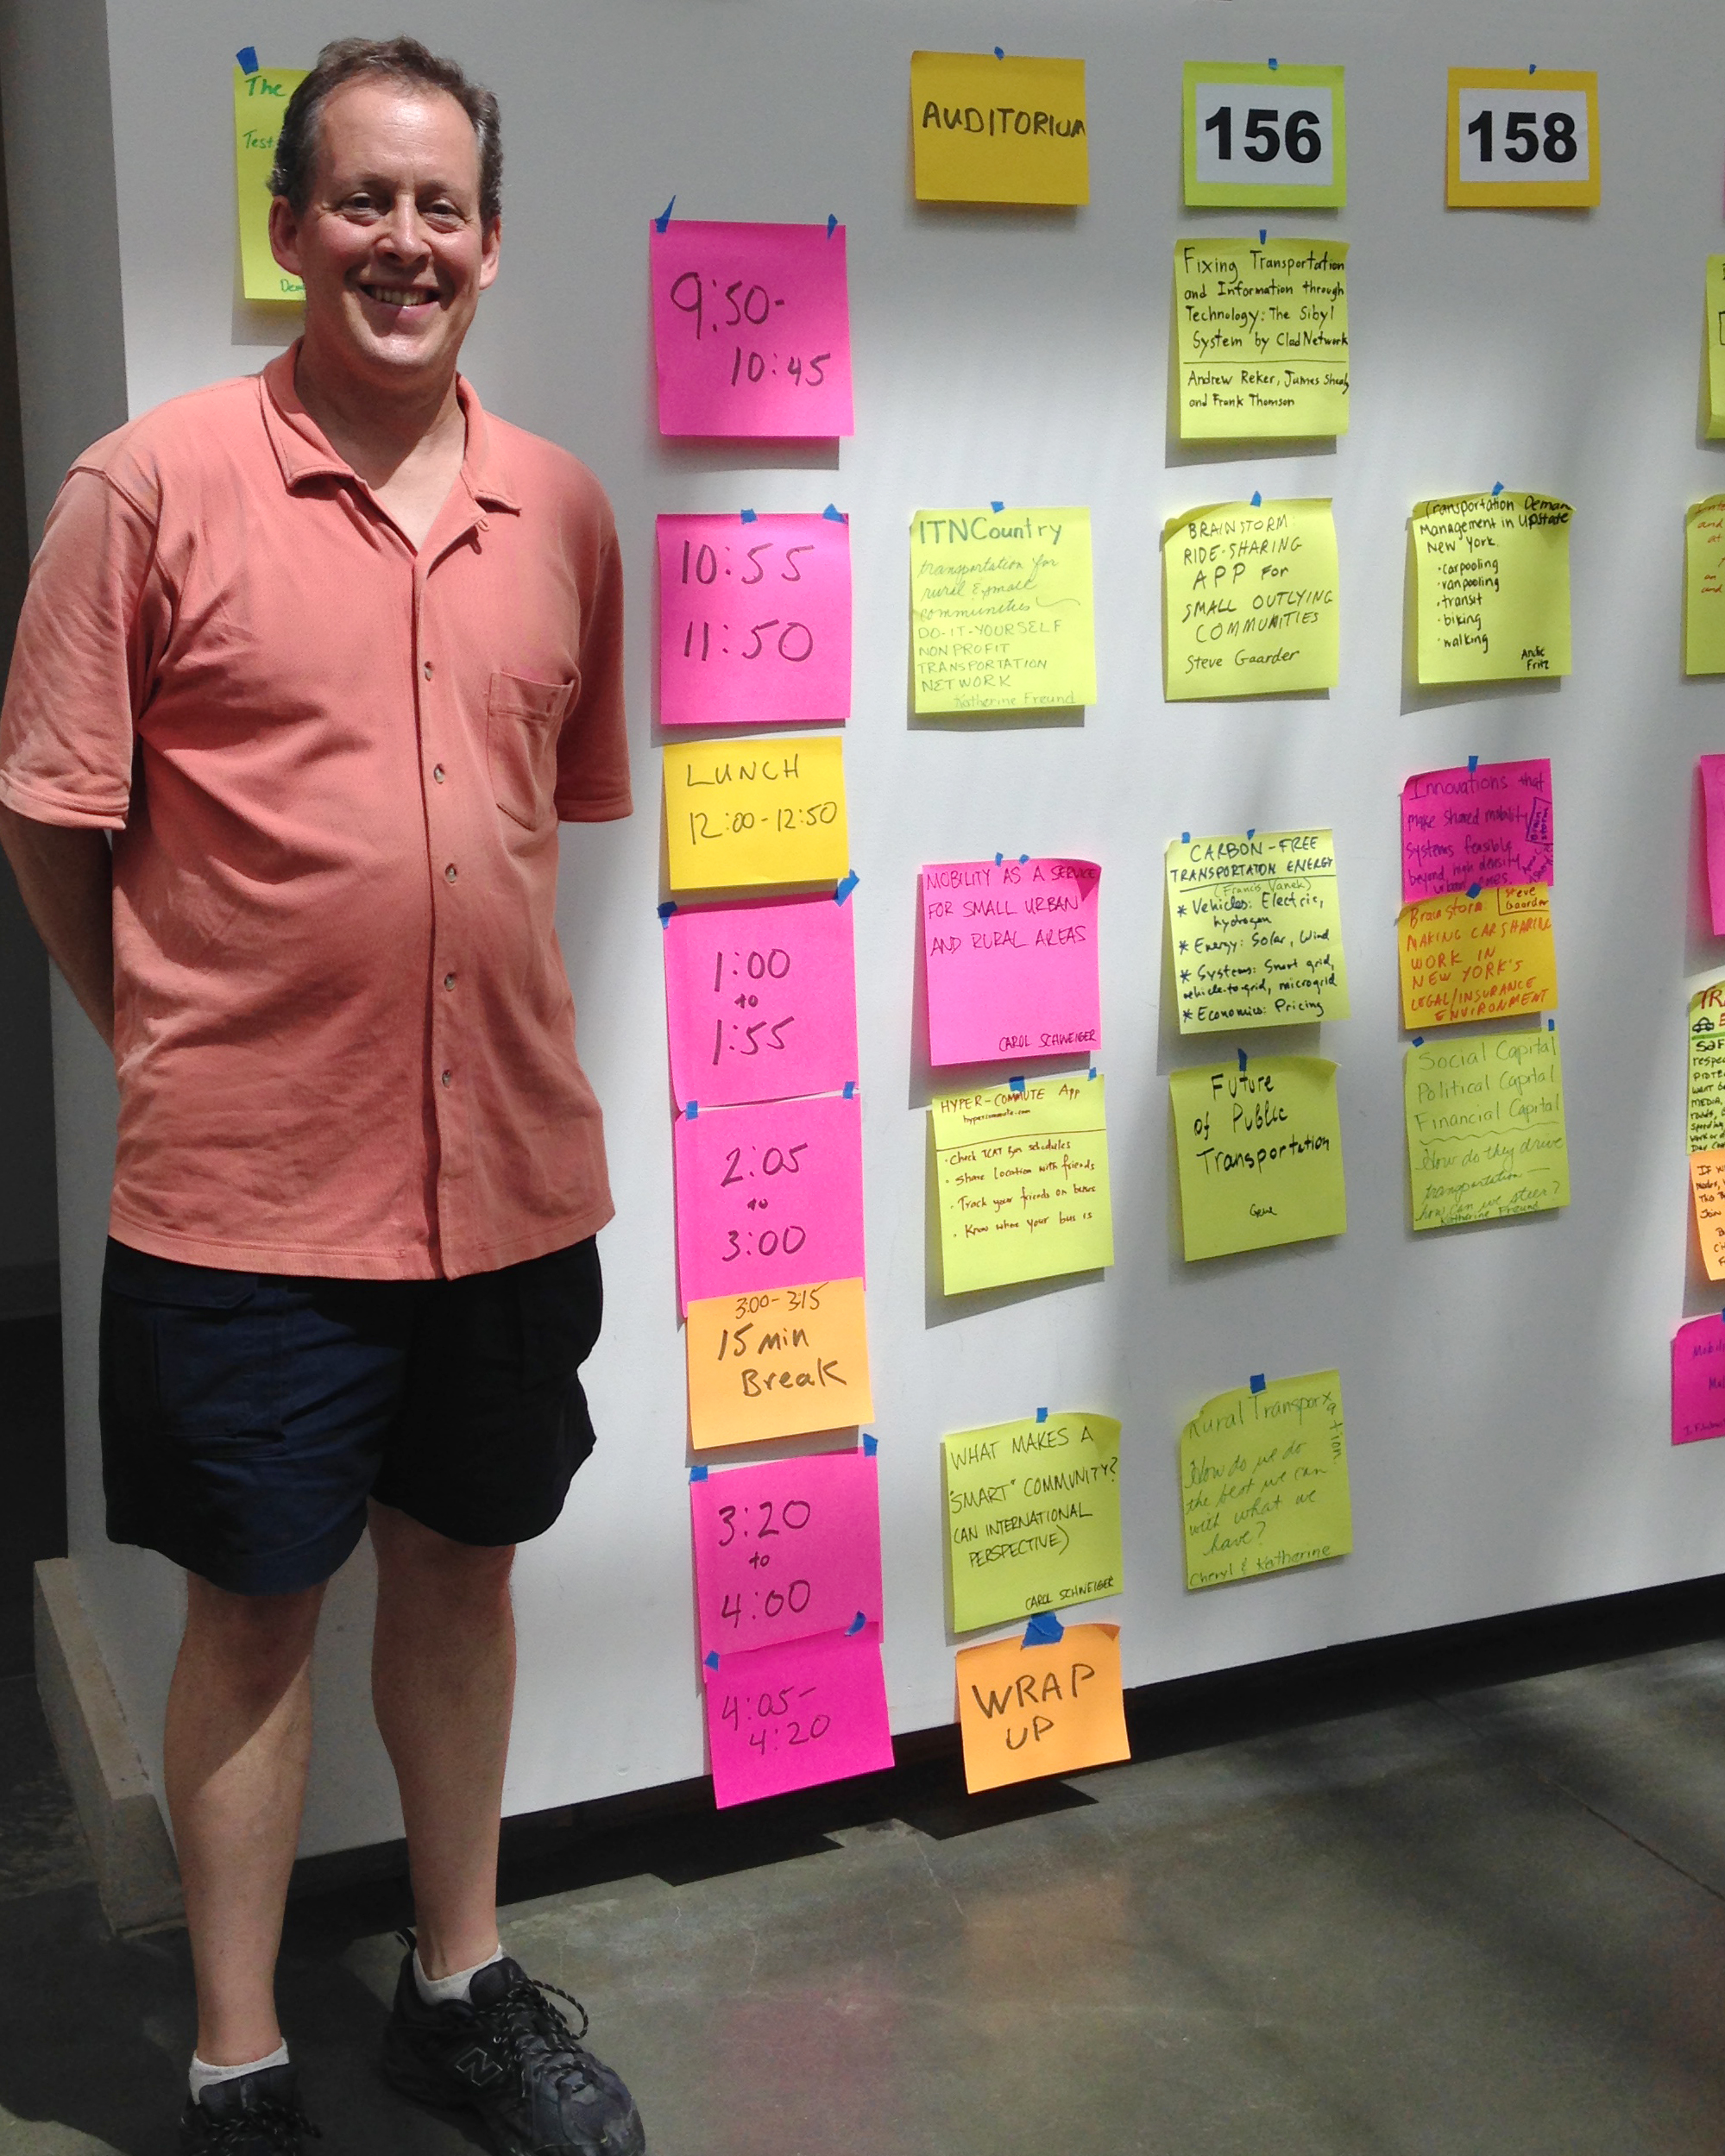 CEE Senior Lecturer Francis Vanek with the Transportation Camp Schedule